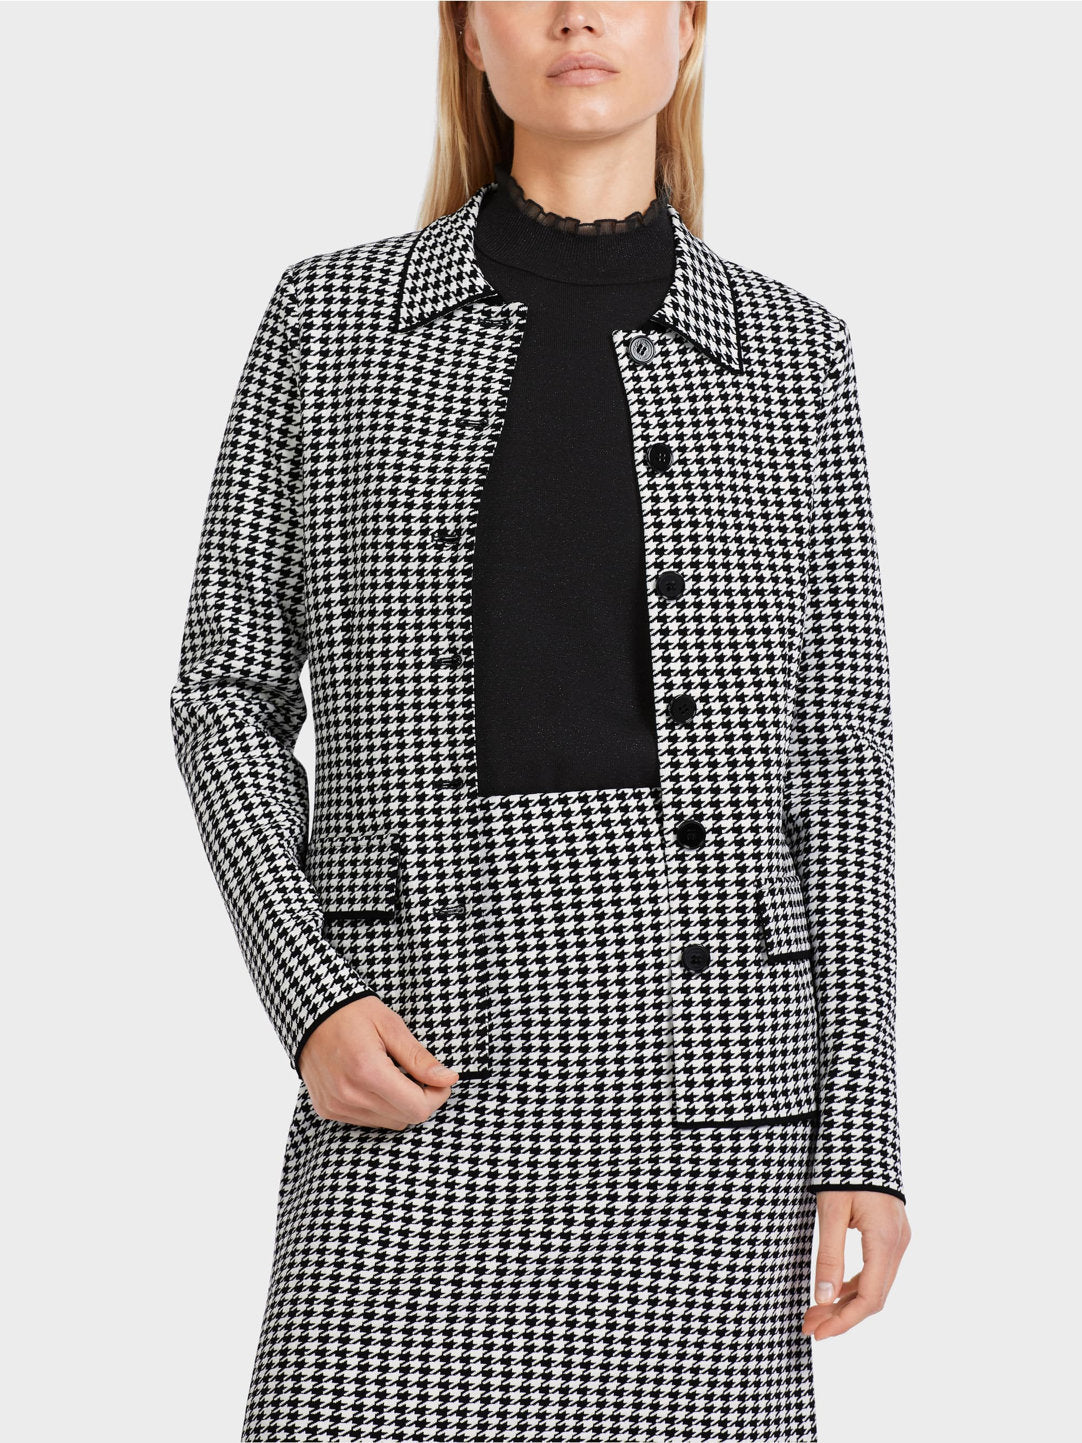 Checked Jacket Knitted In Germany_VC 31.10 M66_190_05